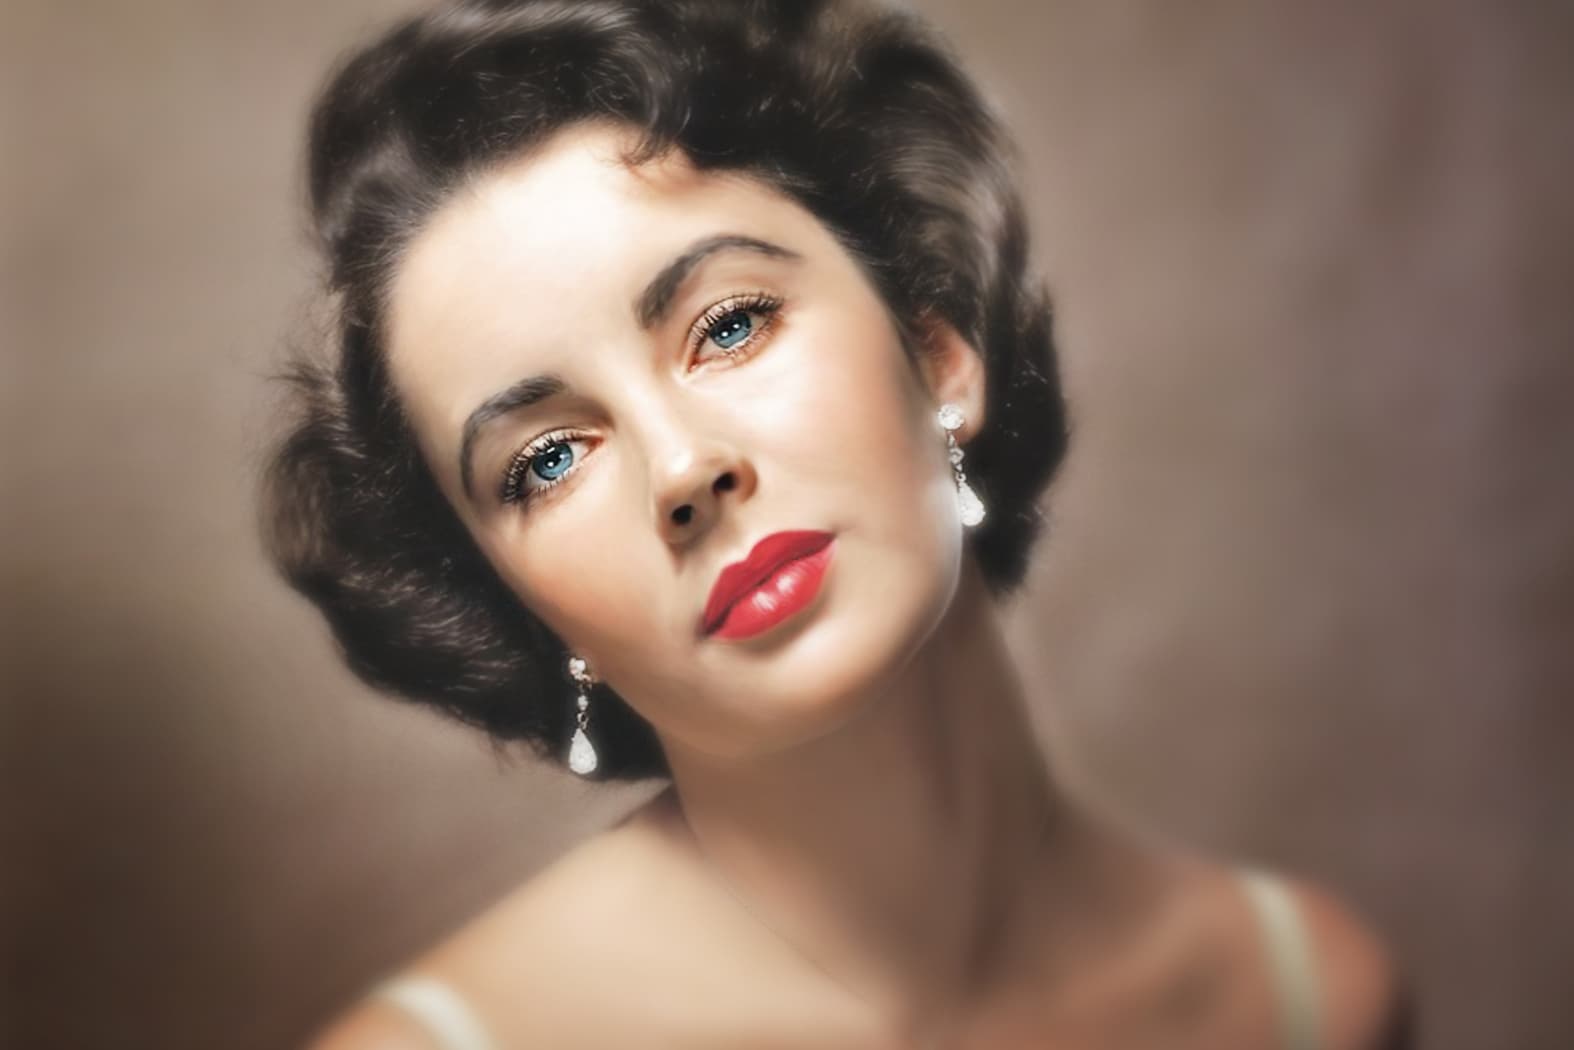 Elizabeth Taylor was famous for her beauty and unusual 'violet' eye colour